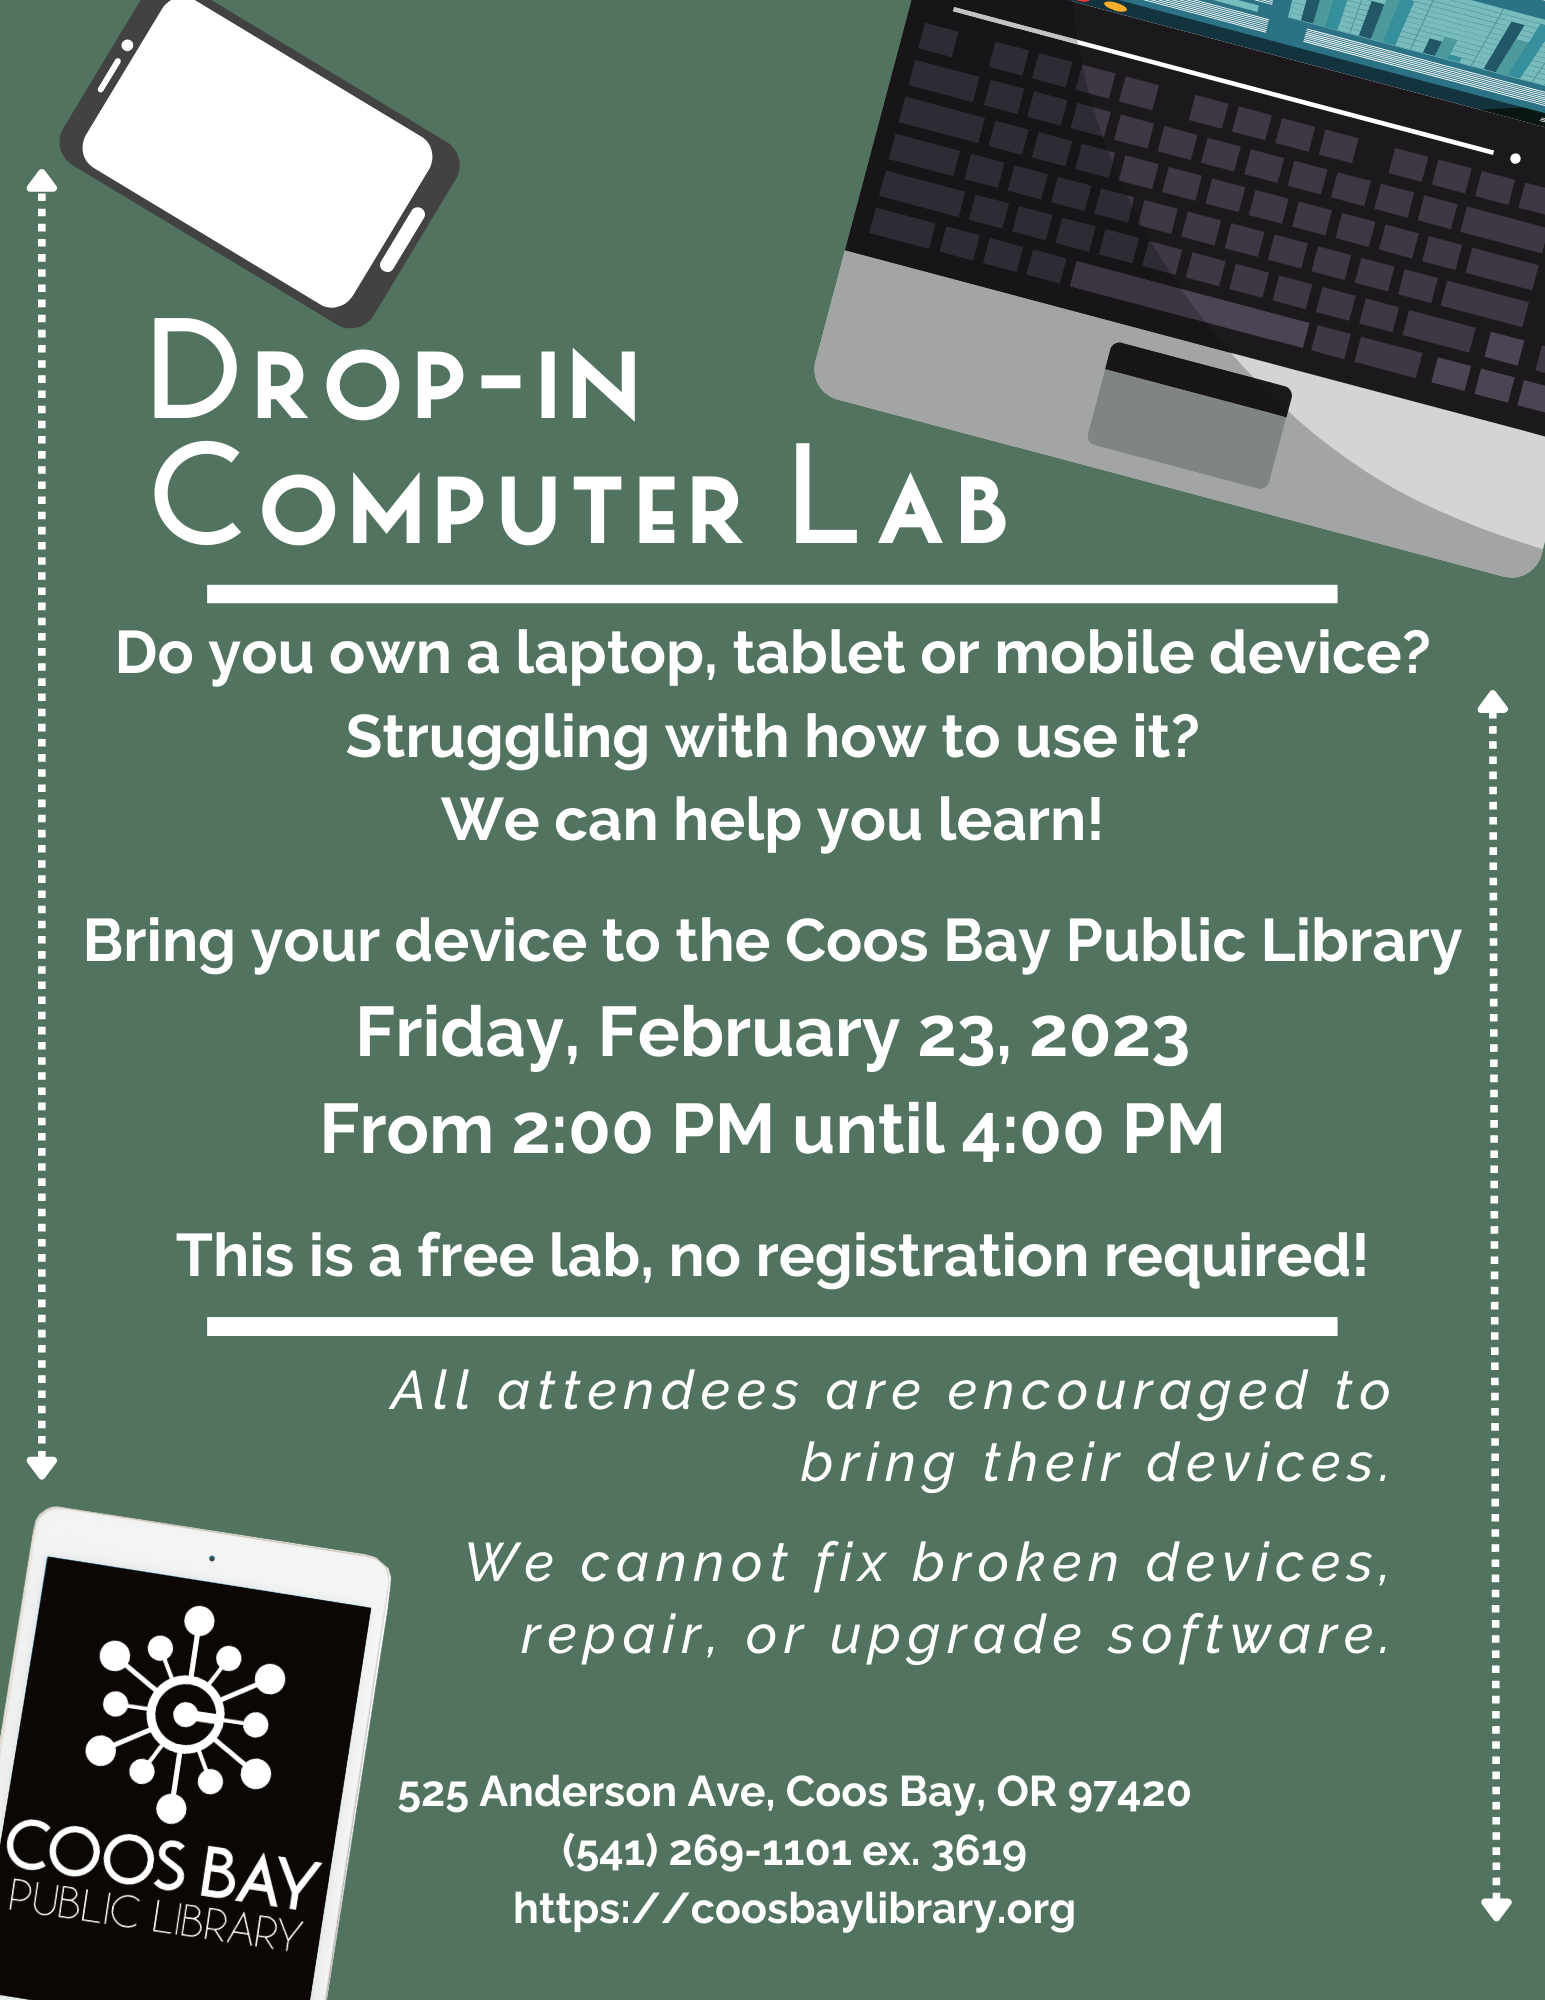 Drop-in computer lab flyer for February 29 from 2 pm to 4 pm